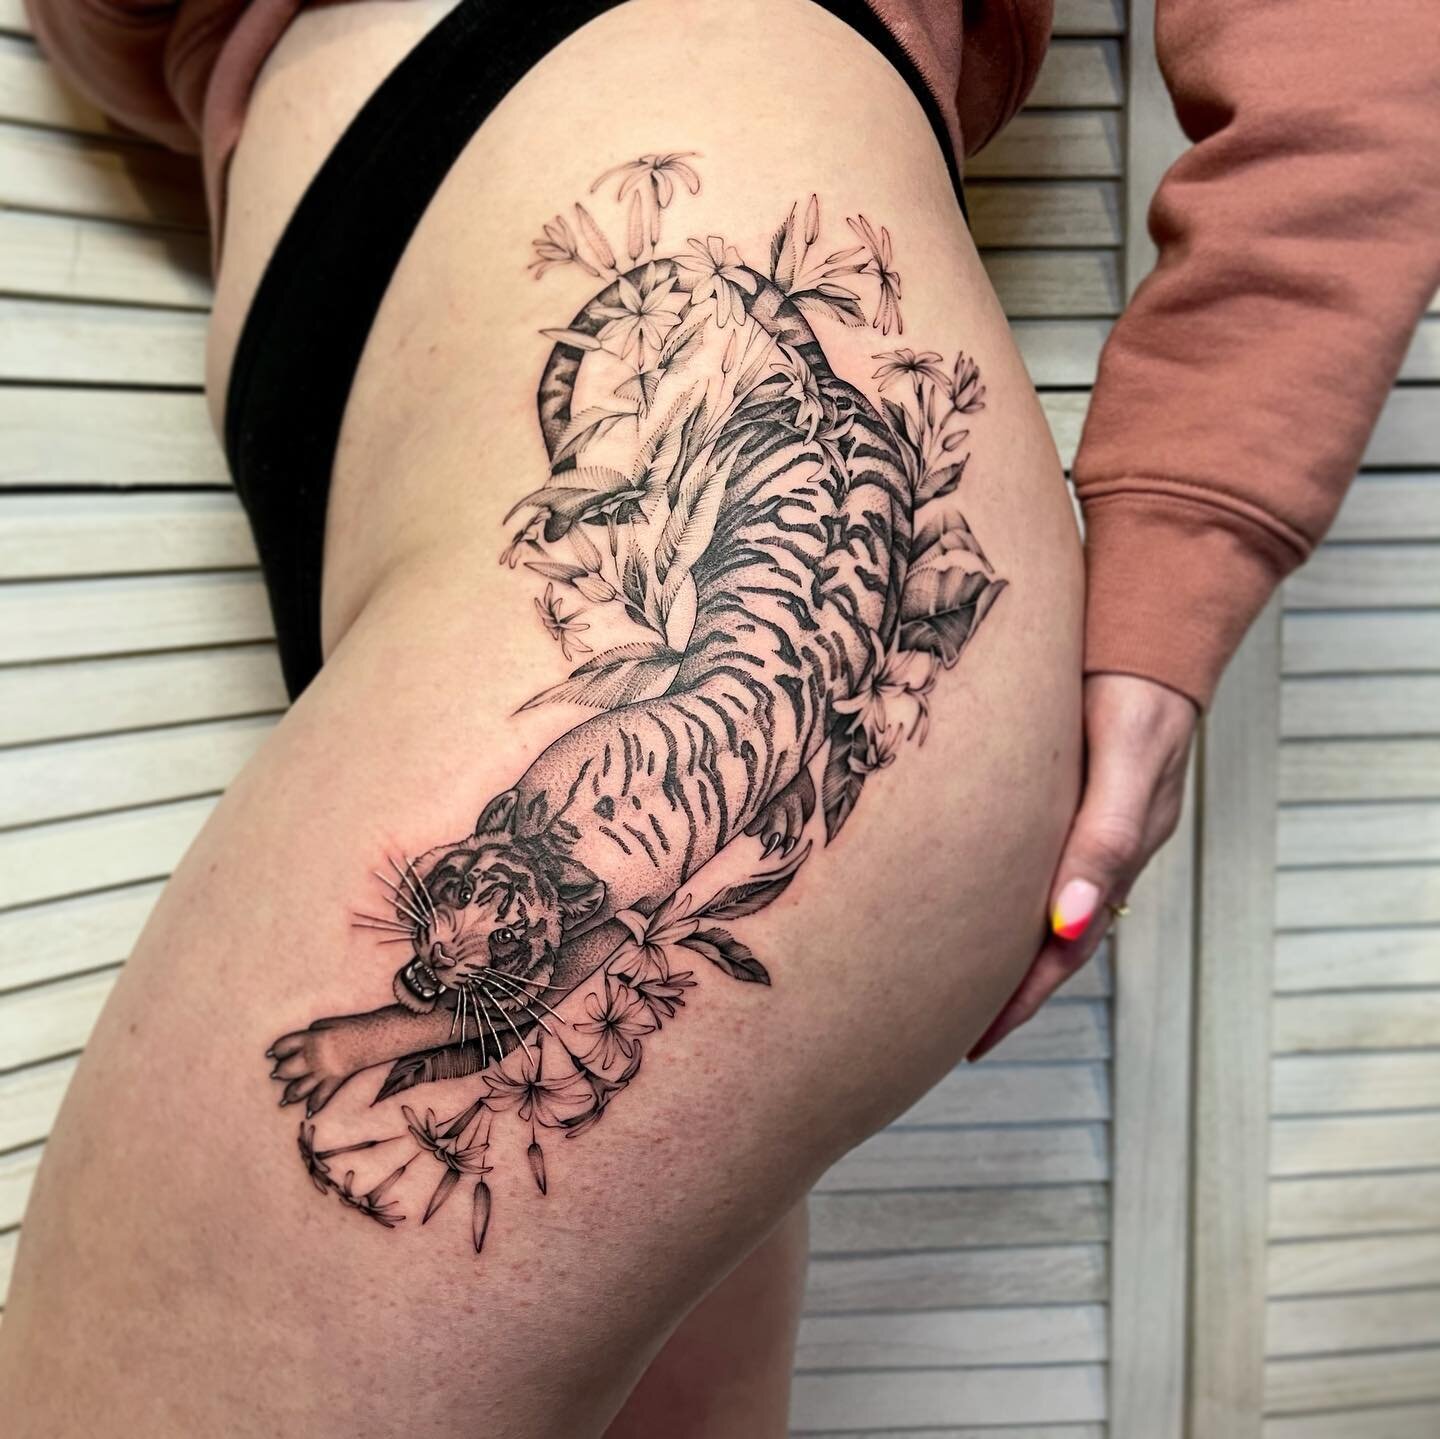 A fierce tiger for one of the badass ladies I know. Thank you @stephmarie34 for trusting me with your tattoos these past several years. This is definitely one of my favorites. 
👉 Swipe to see the details of her fierce face 👉
🌿 Vining jasmine 
🌸🌸